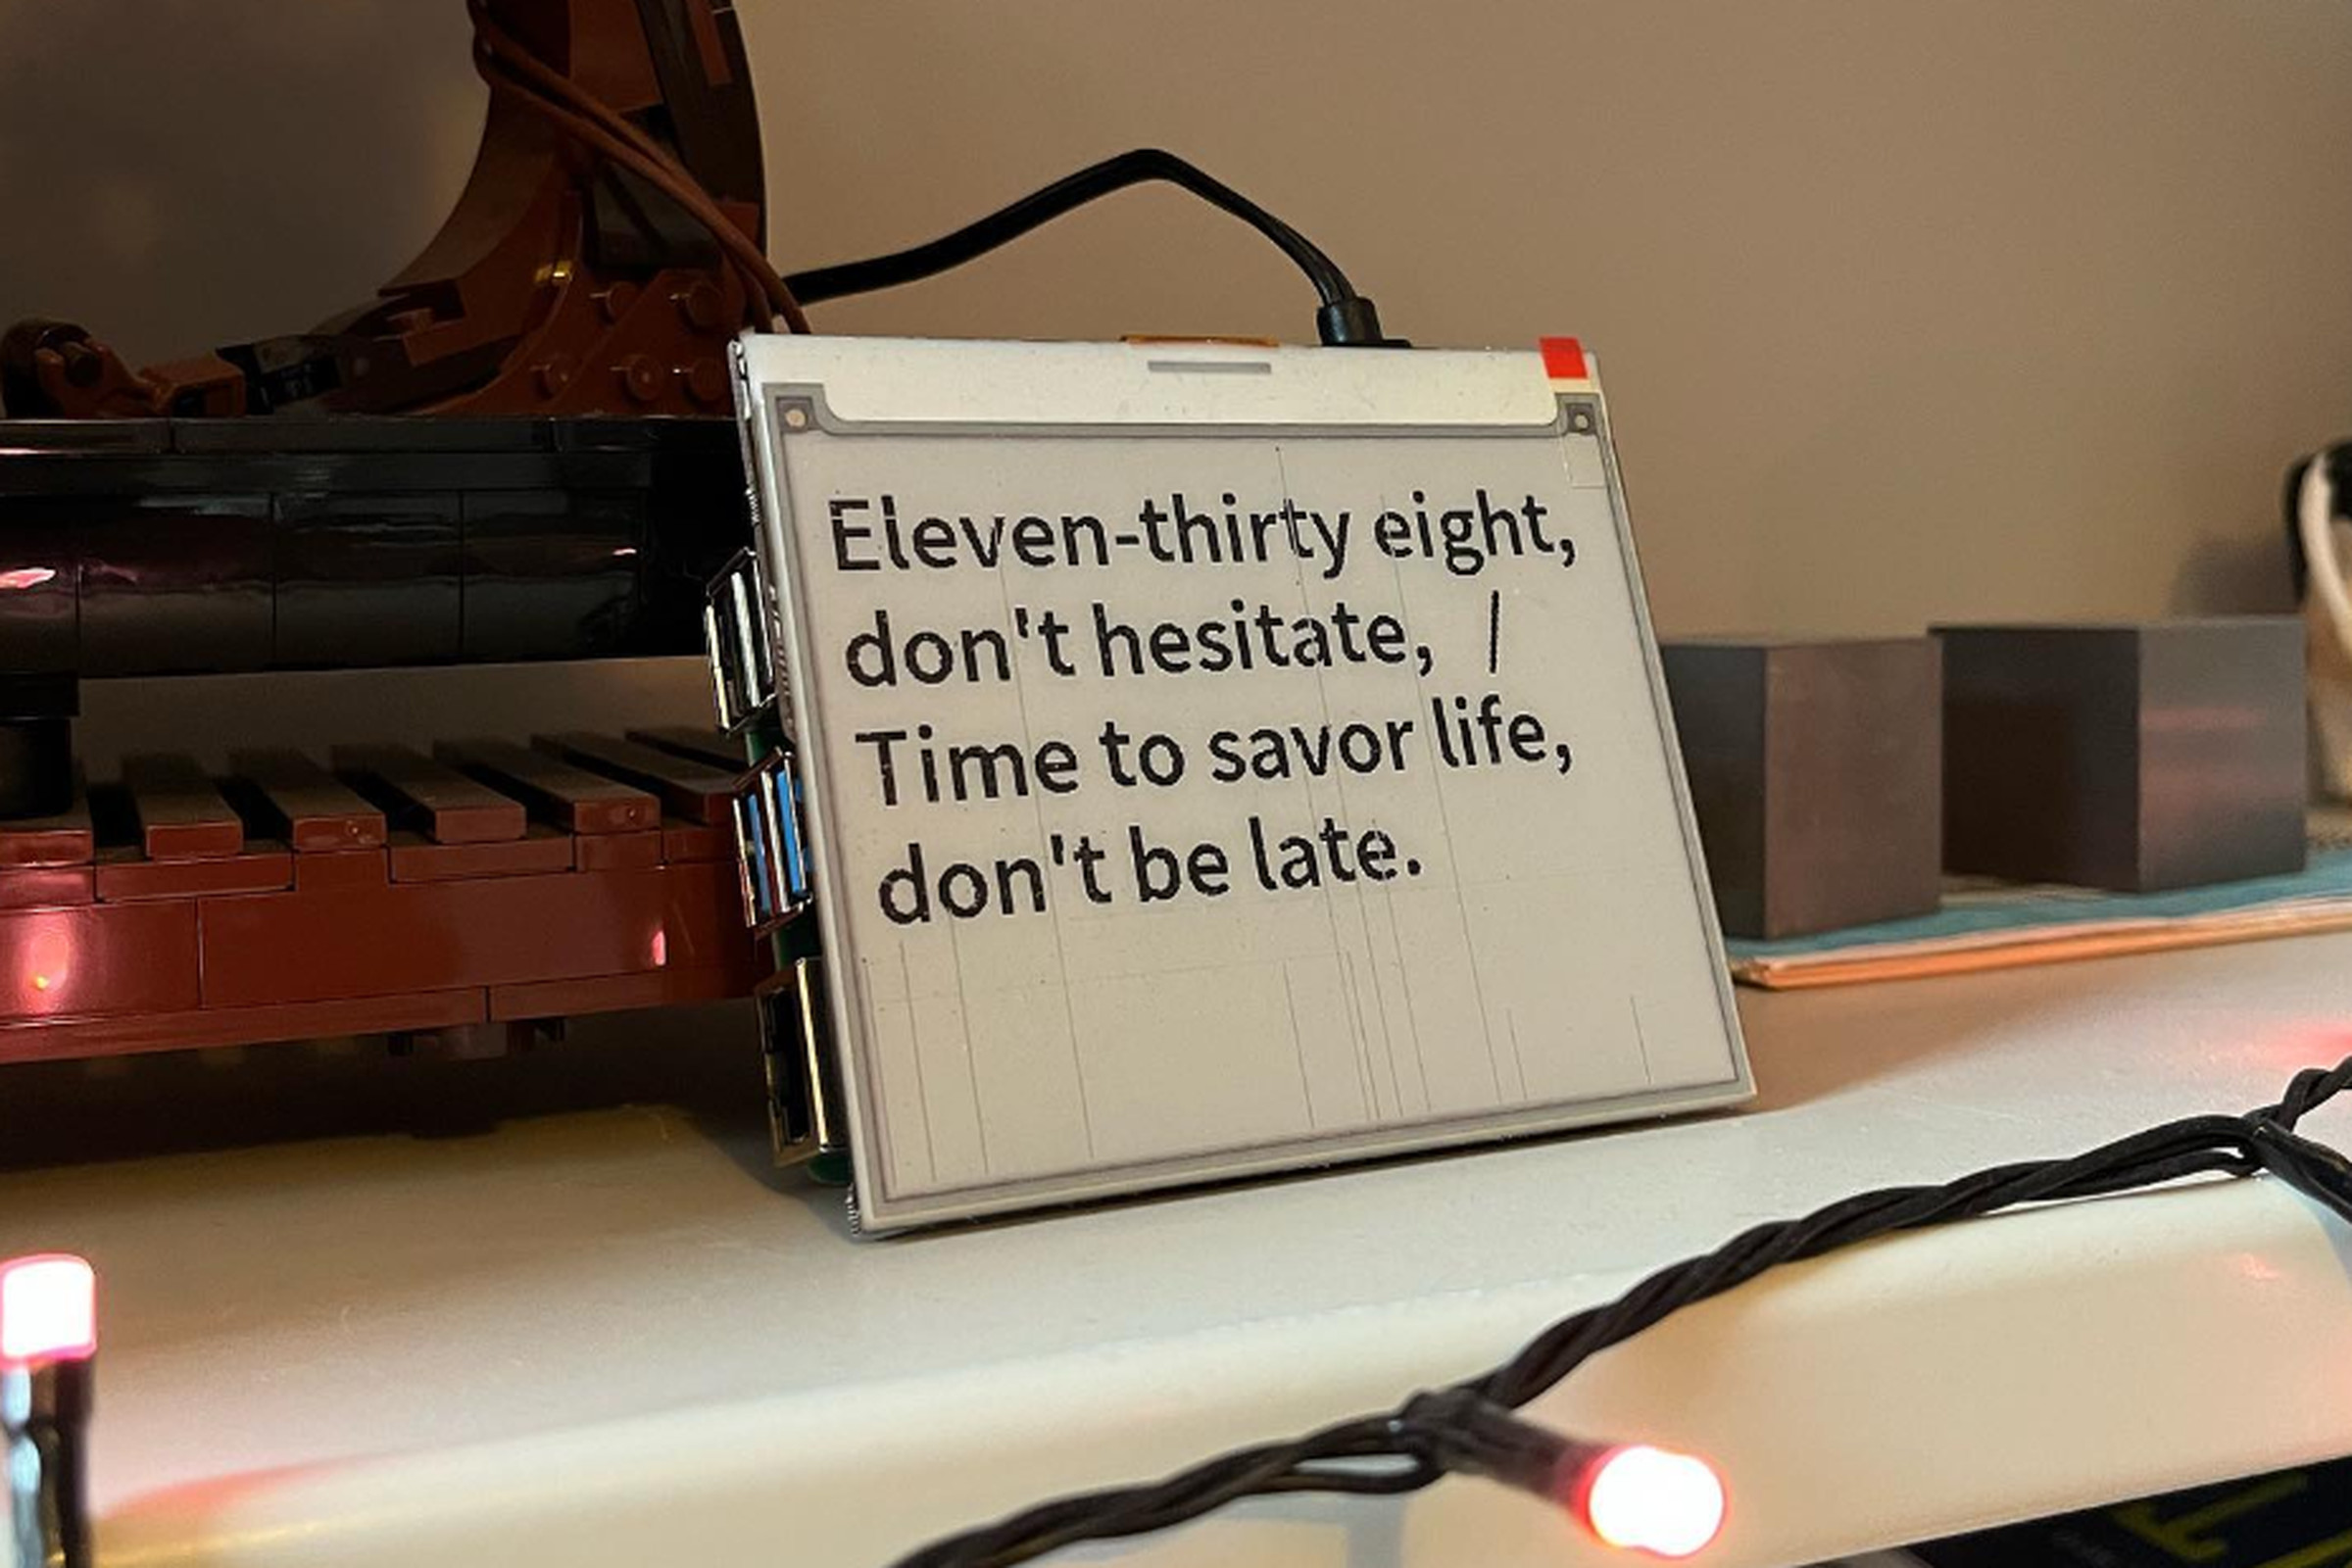 A photograph of a low-fi E Ink screen sitting on a bookshelf. The text on the clock says “Eleven-thirty eight, don’t hesitate, / Time to savor life, don’t be late.”